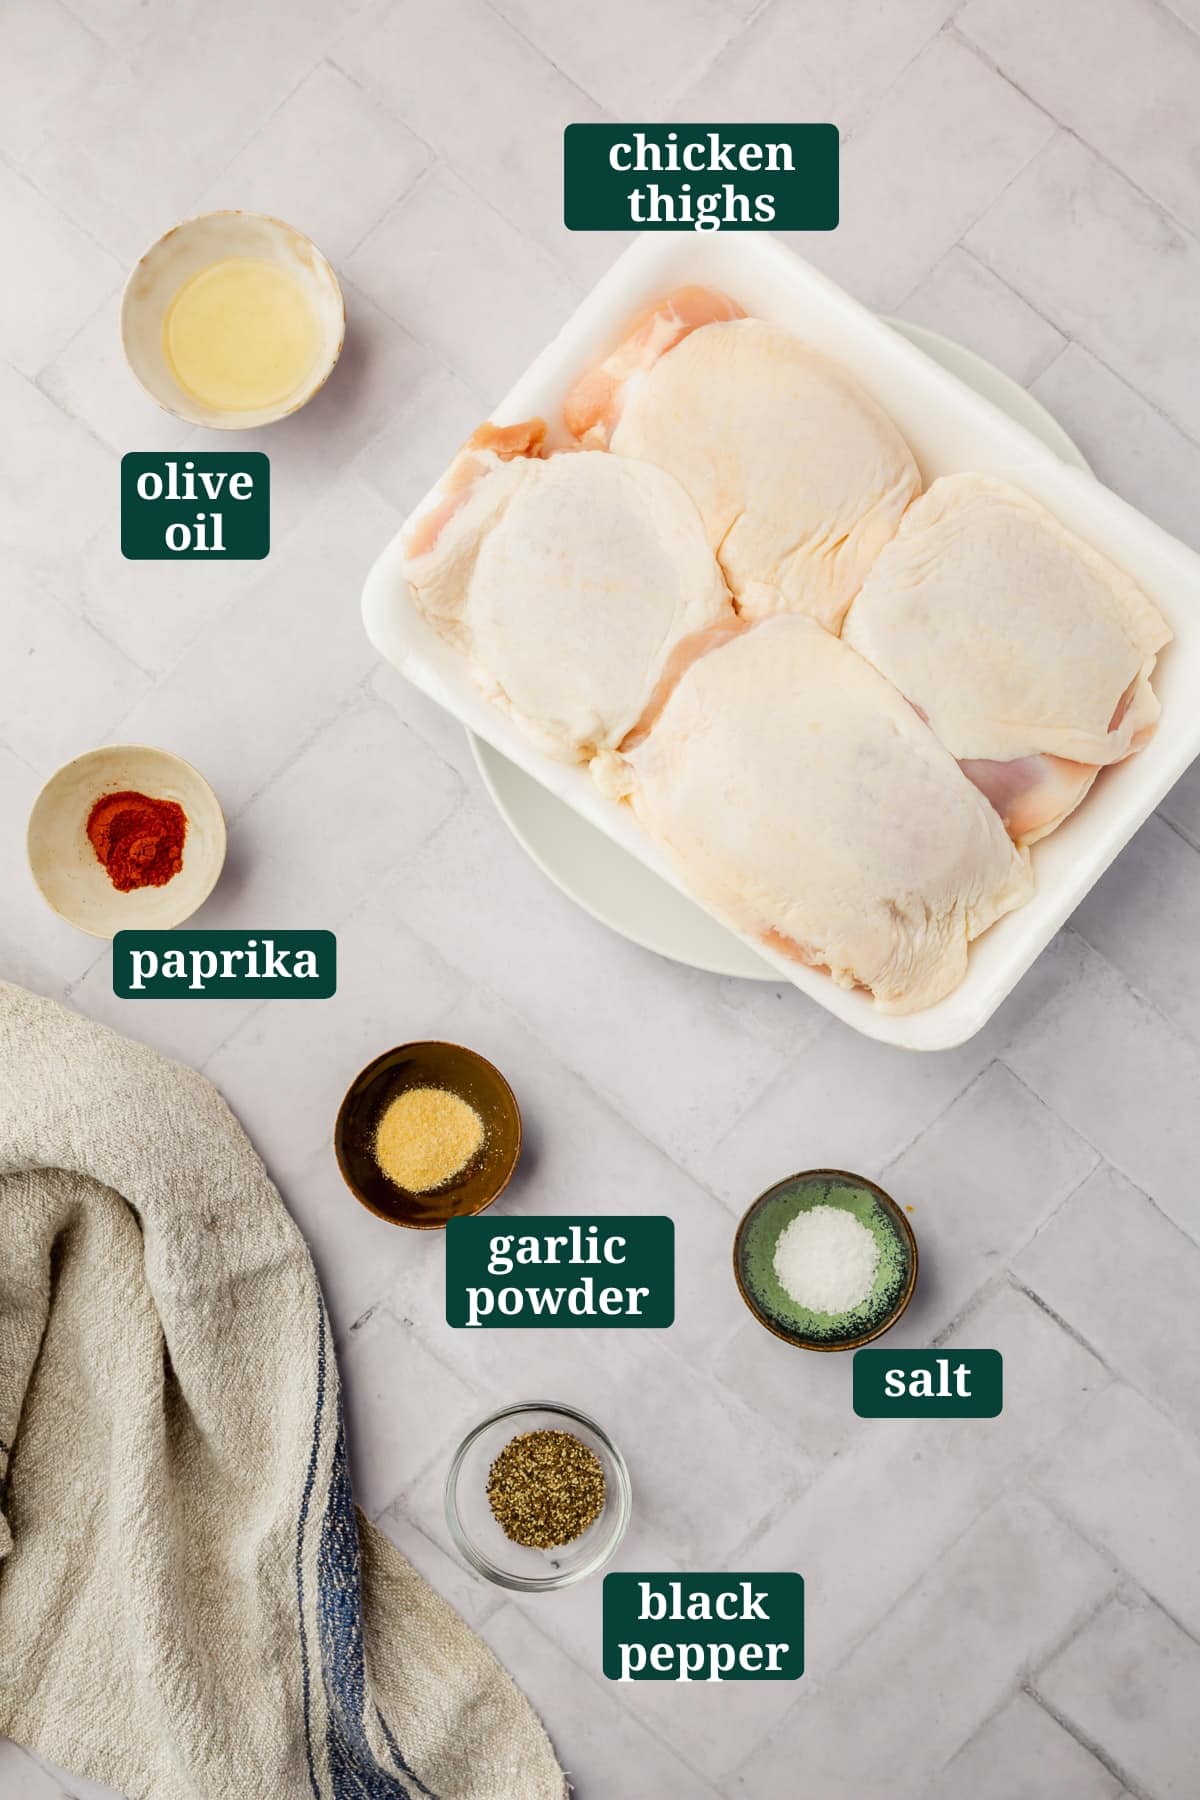 Ingredients in small bowls to make air fryer crispy chicken thighs including bone-in skin-on chicken thighs, olive oil, paprika, garlic powder, salt and black pepper with text overlays over each ingredient.